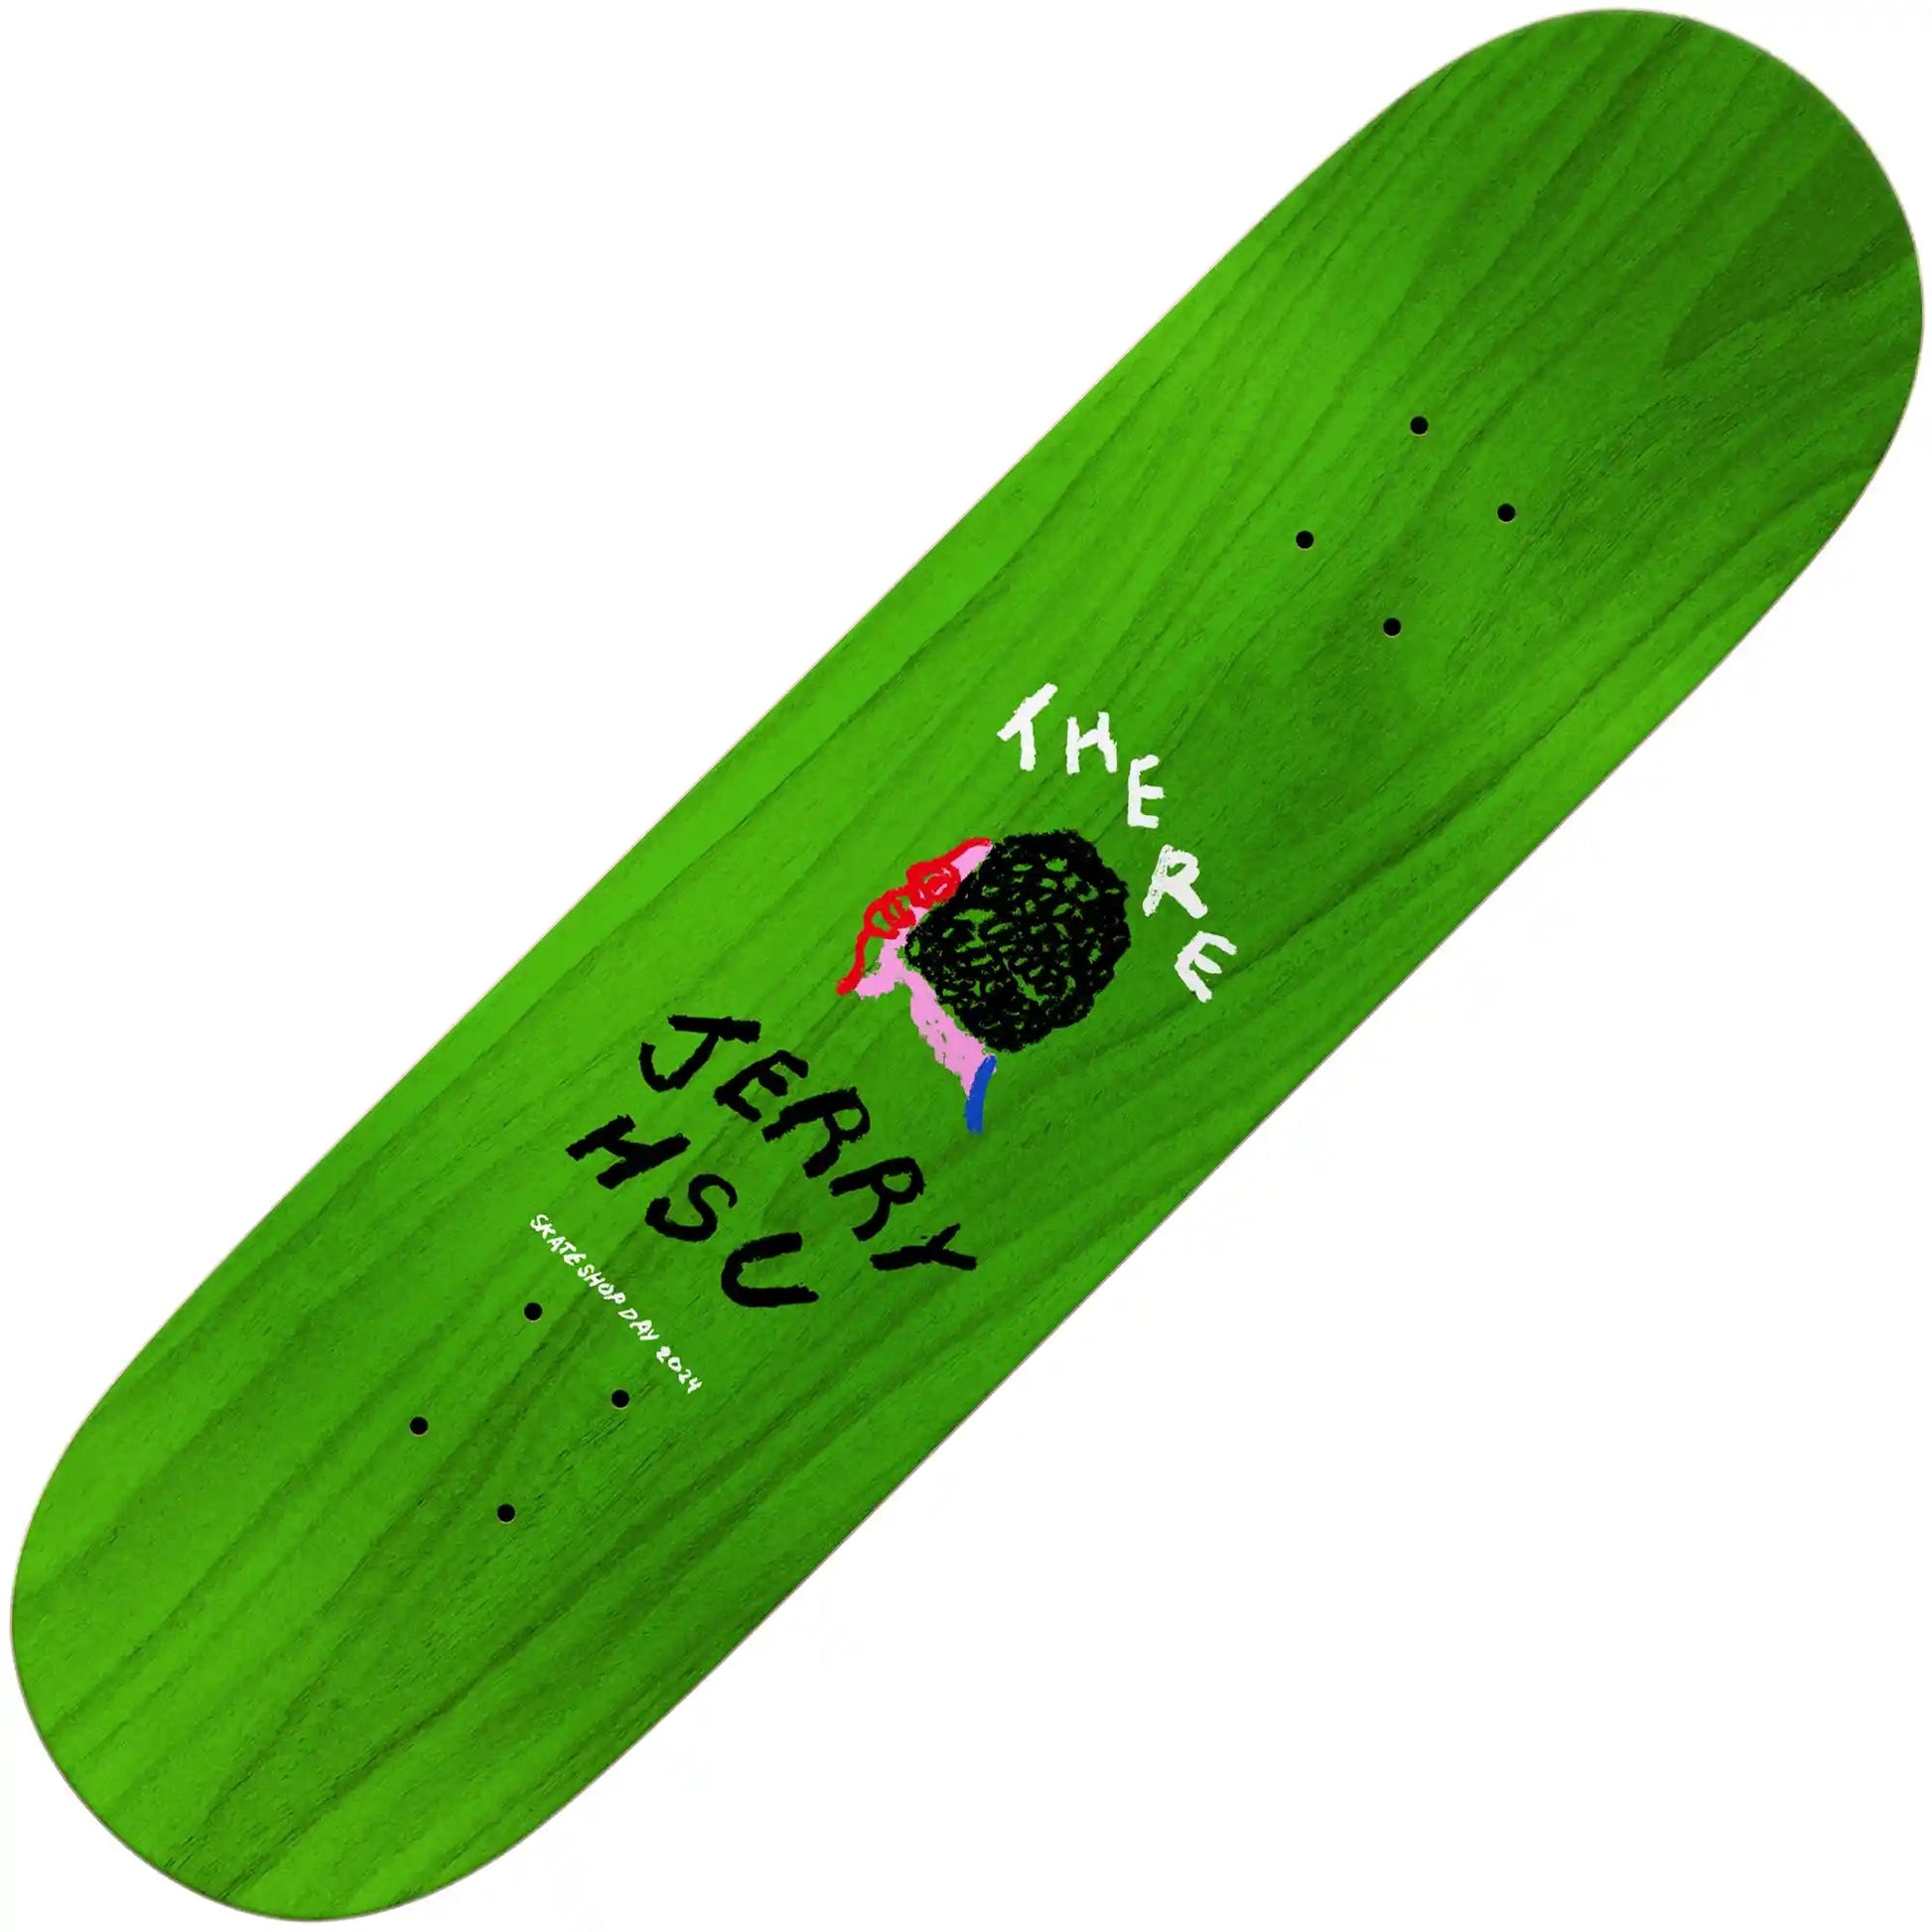 There Jerry Hsu Guest SSD-24 True Fit Deck (8.5”) - Tiki Room Skateboards - 2